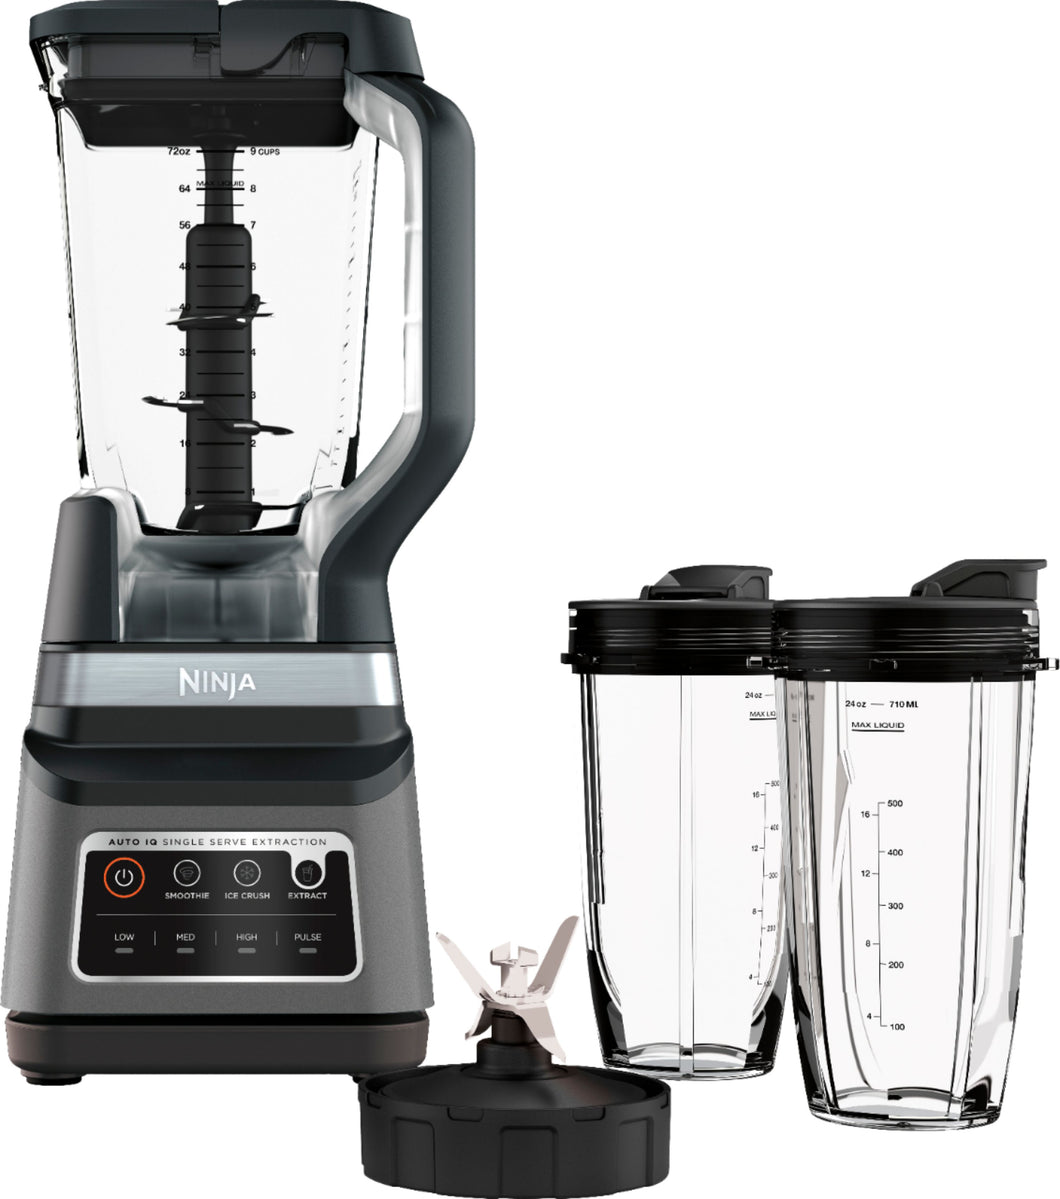 Ninja BN751 Professional Plus Blender DUO with Auto-IQ - Black/Stainless Steel